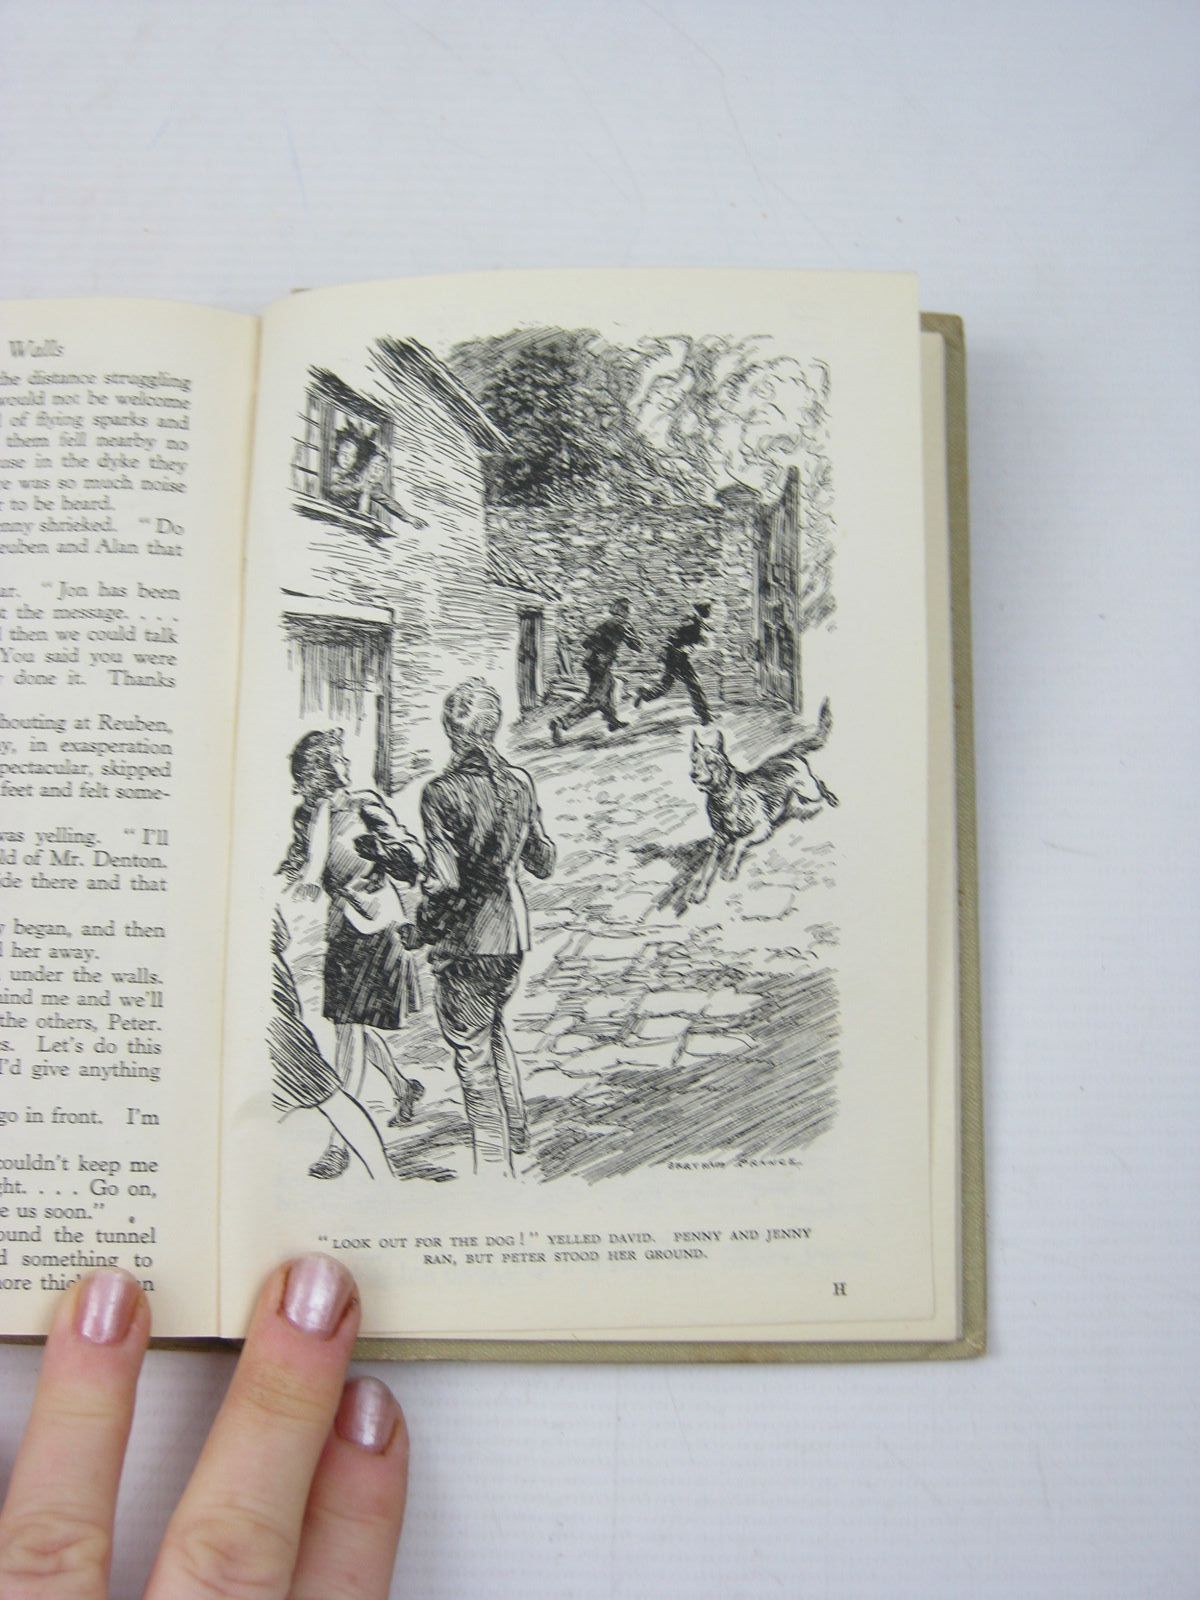 Photo of THE SECRET OF GREY WALLS written by Saville, Malcolm illustrated by Prance, Bertram published by George Newnes Ltd. (STOCK CODE: 1402637)  for sale by Stella & Rose's Books